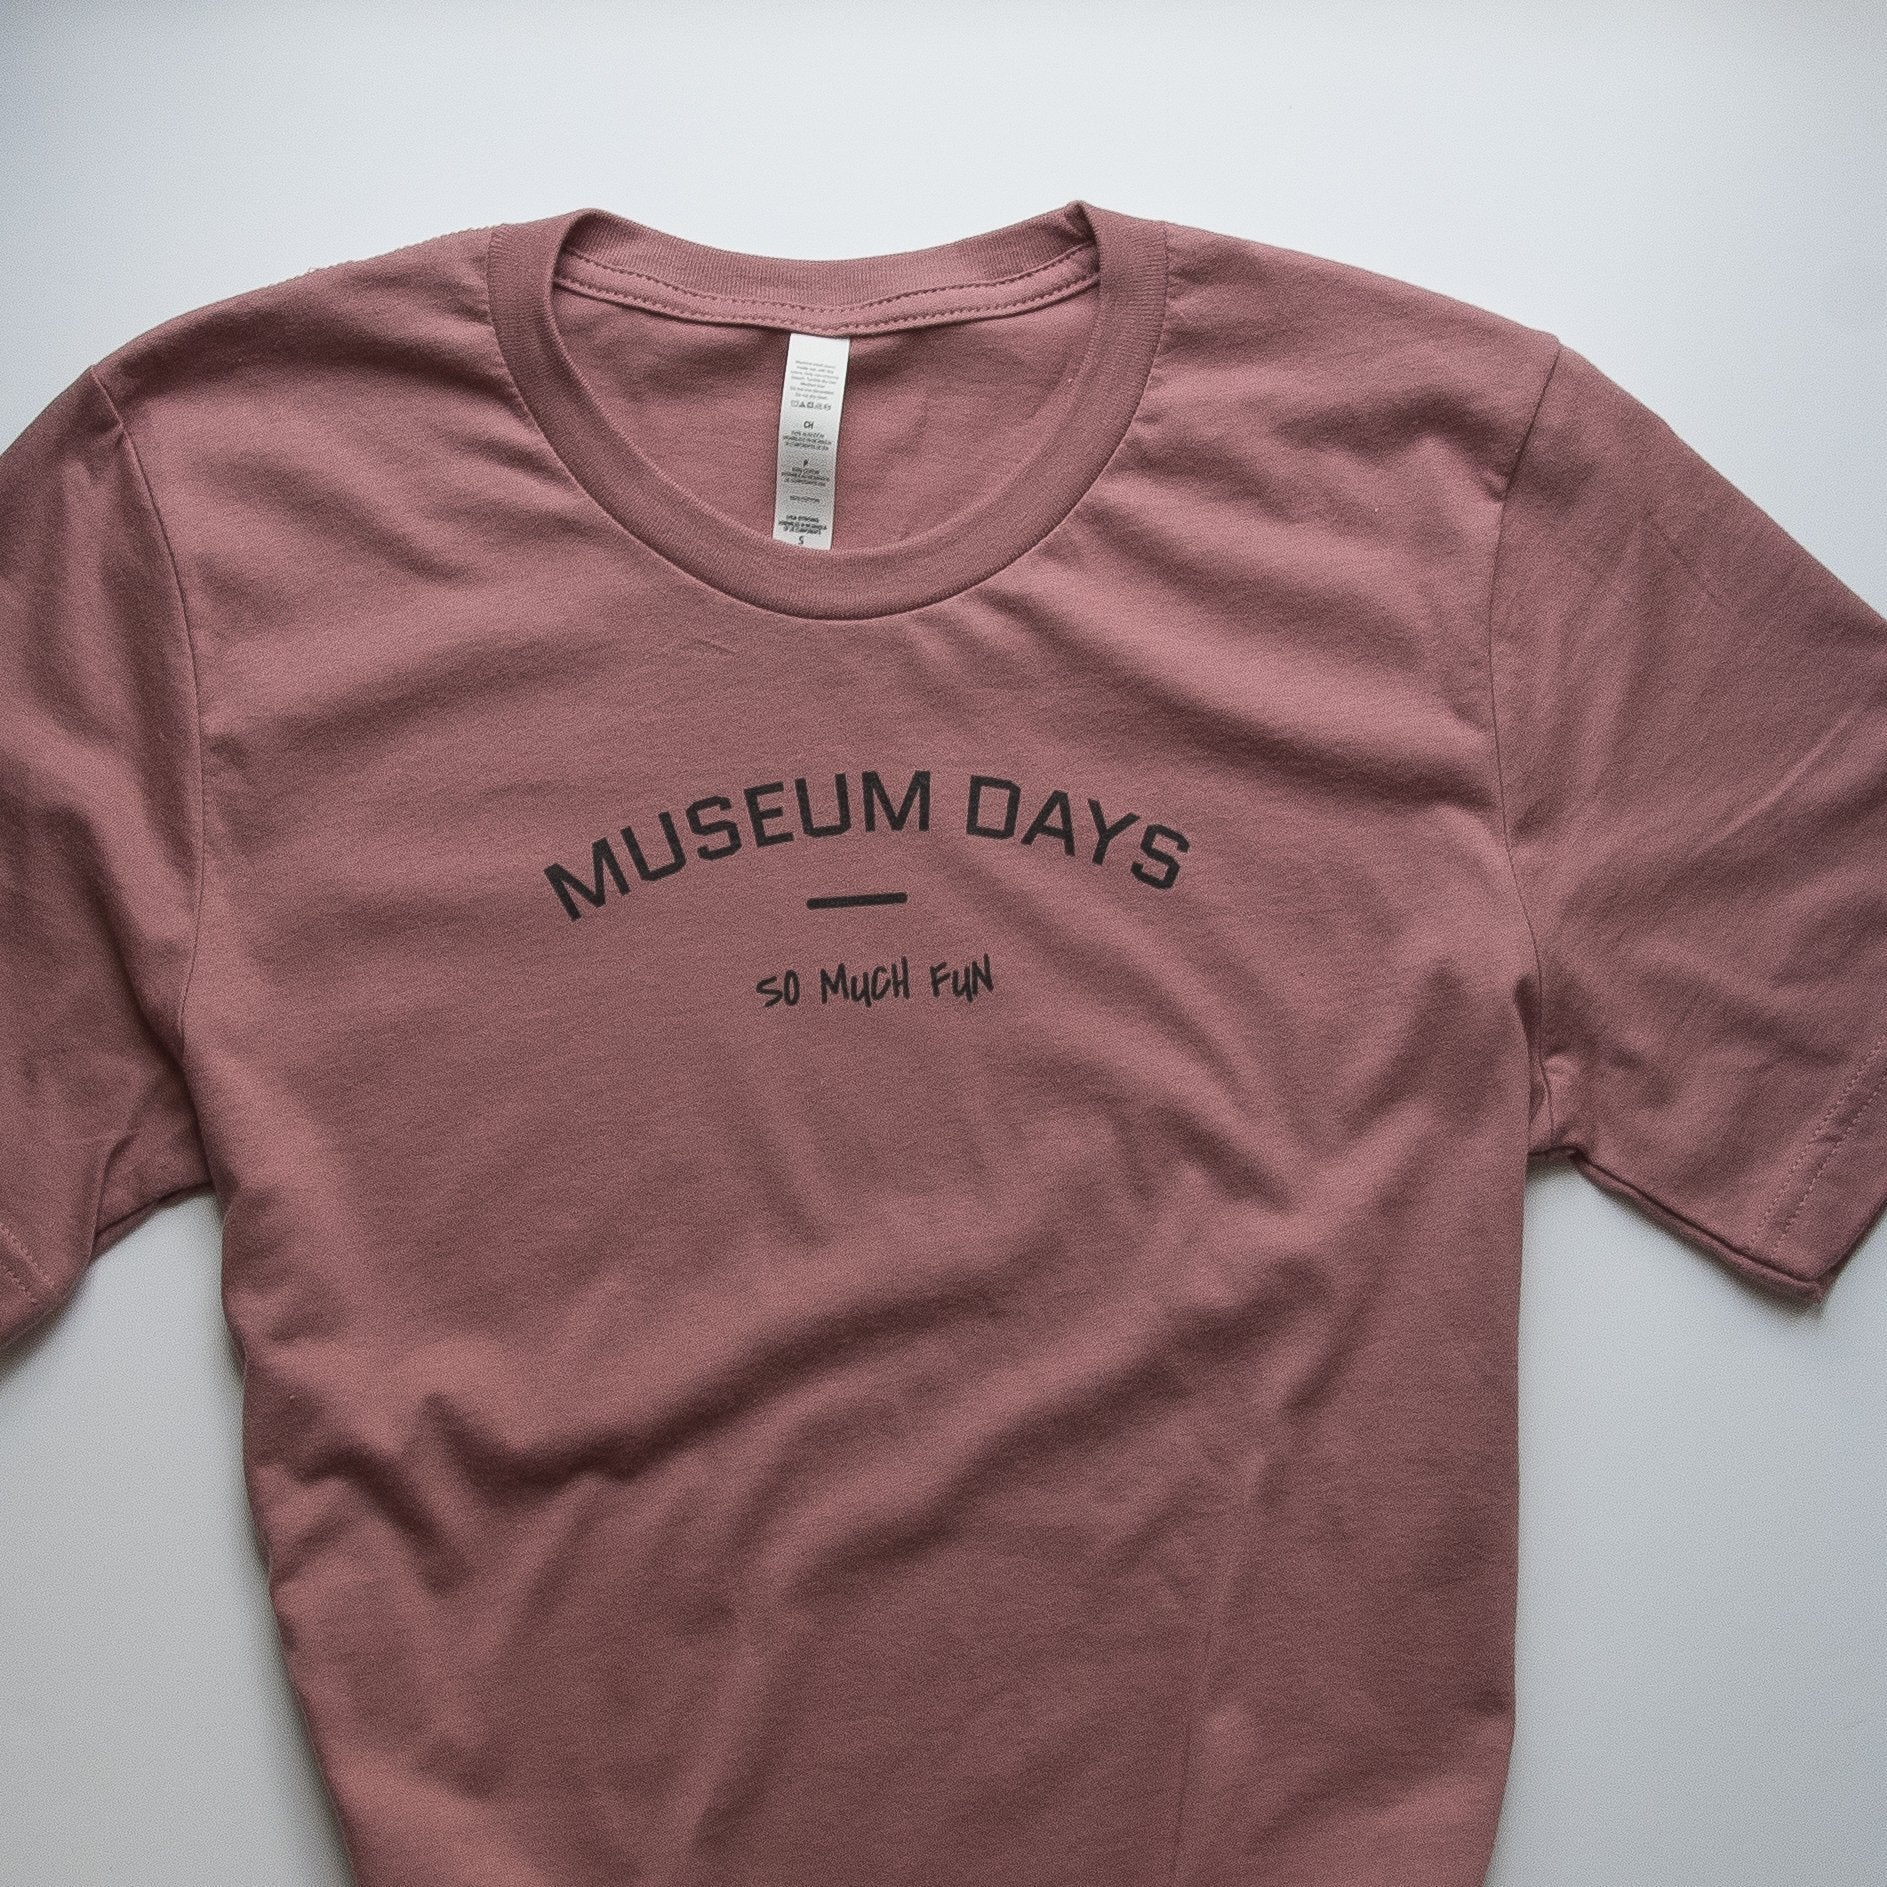 MUSEUM DAYS SO MUCH FUN - Short Sleeve Adult Tee - 3 COLORS! - Little Mate Adventures 